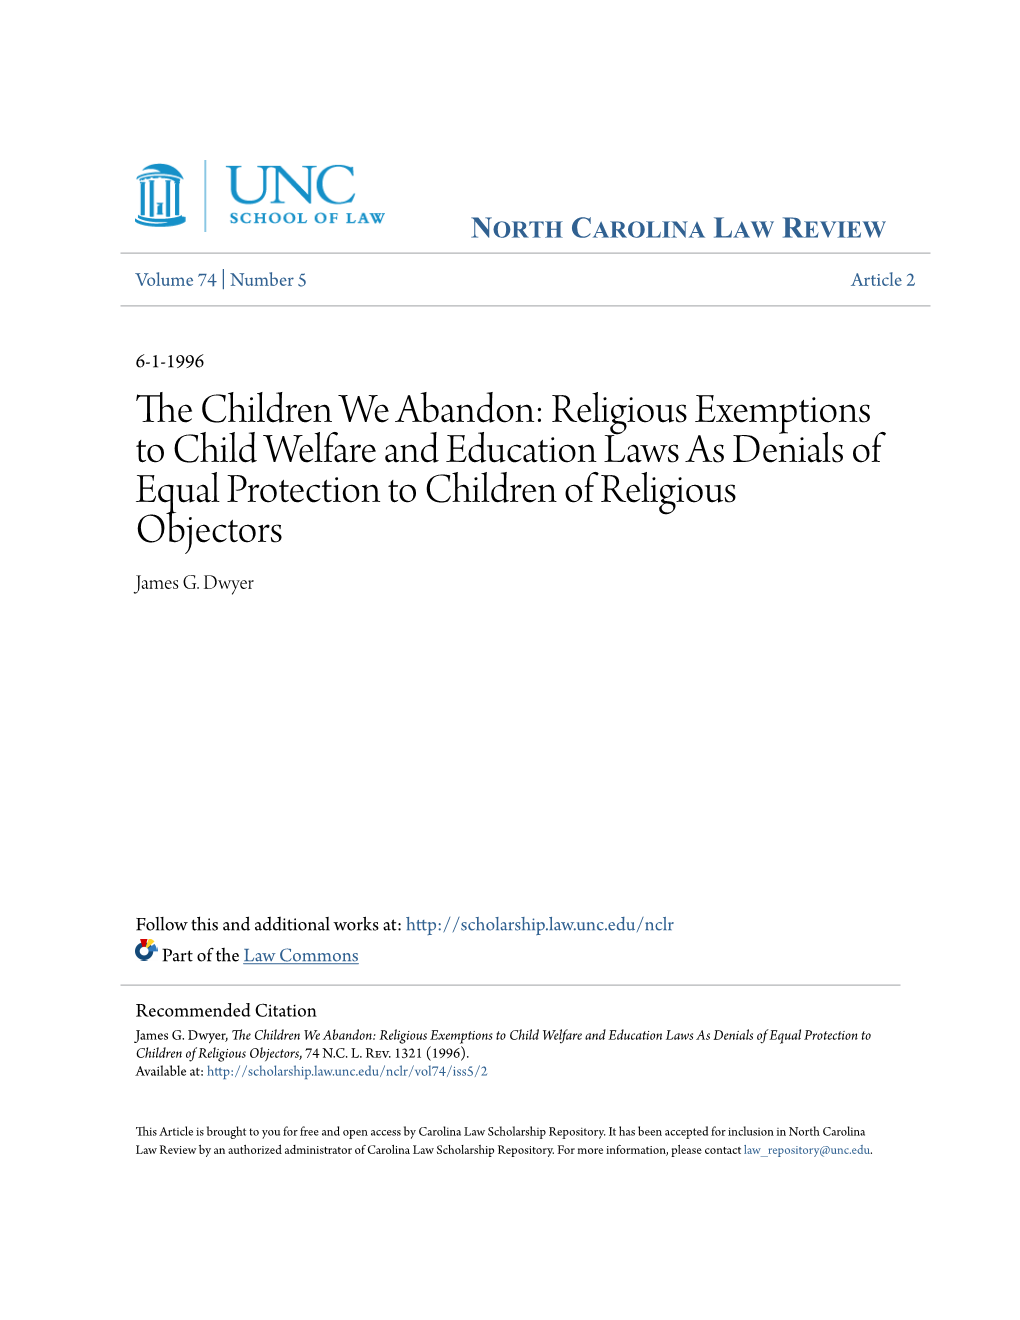 The Children We Abandon: Religious Exemptions to Child Welfare and Education Laws As Denials of Equal Protection to Children of Religious Objectors, 74 N.C